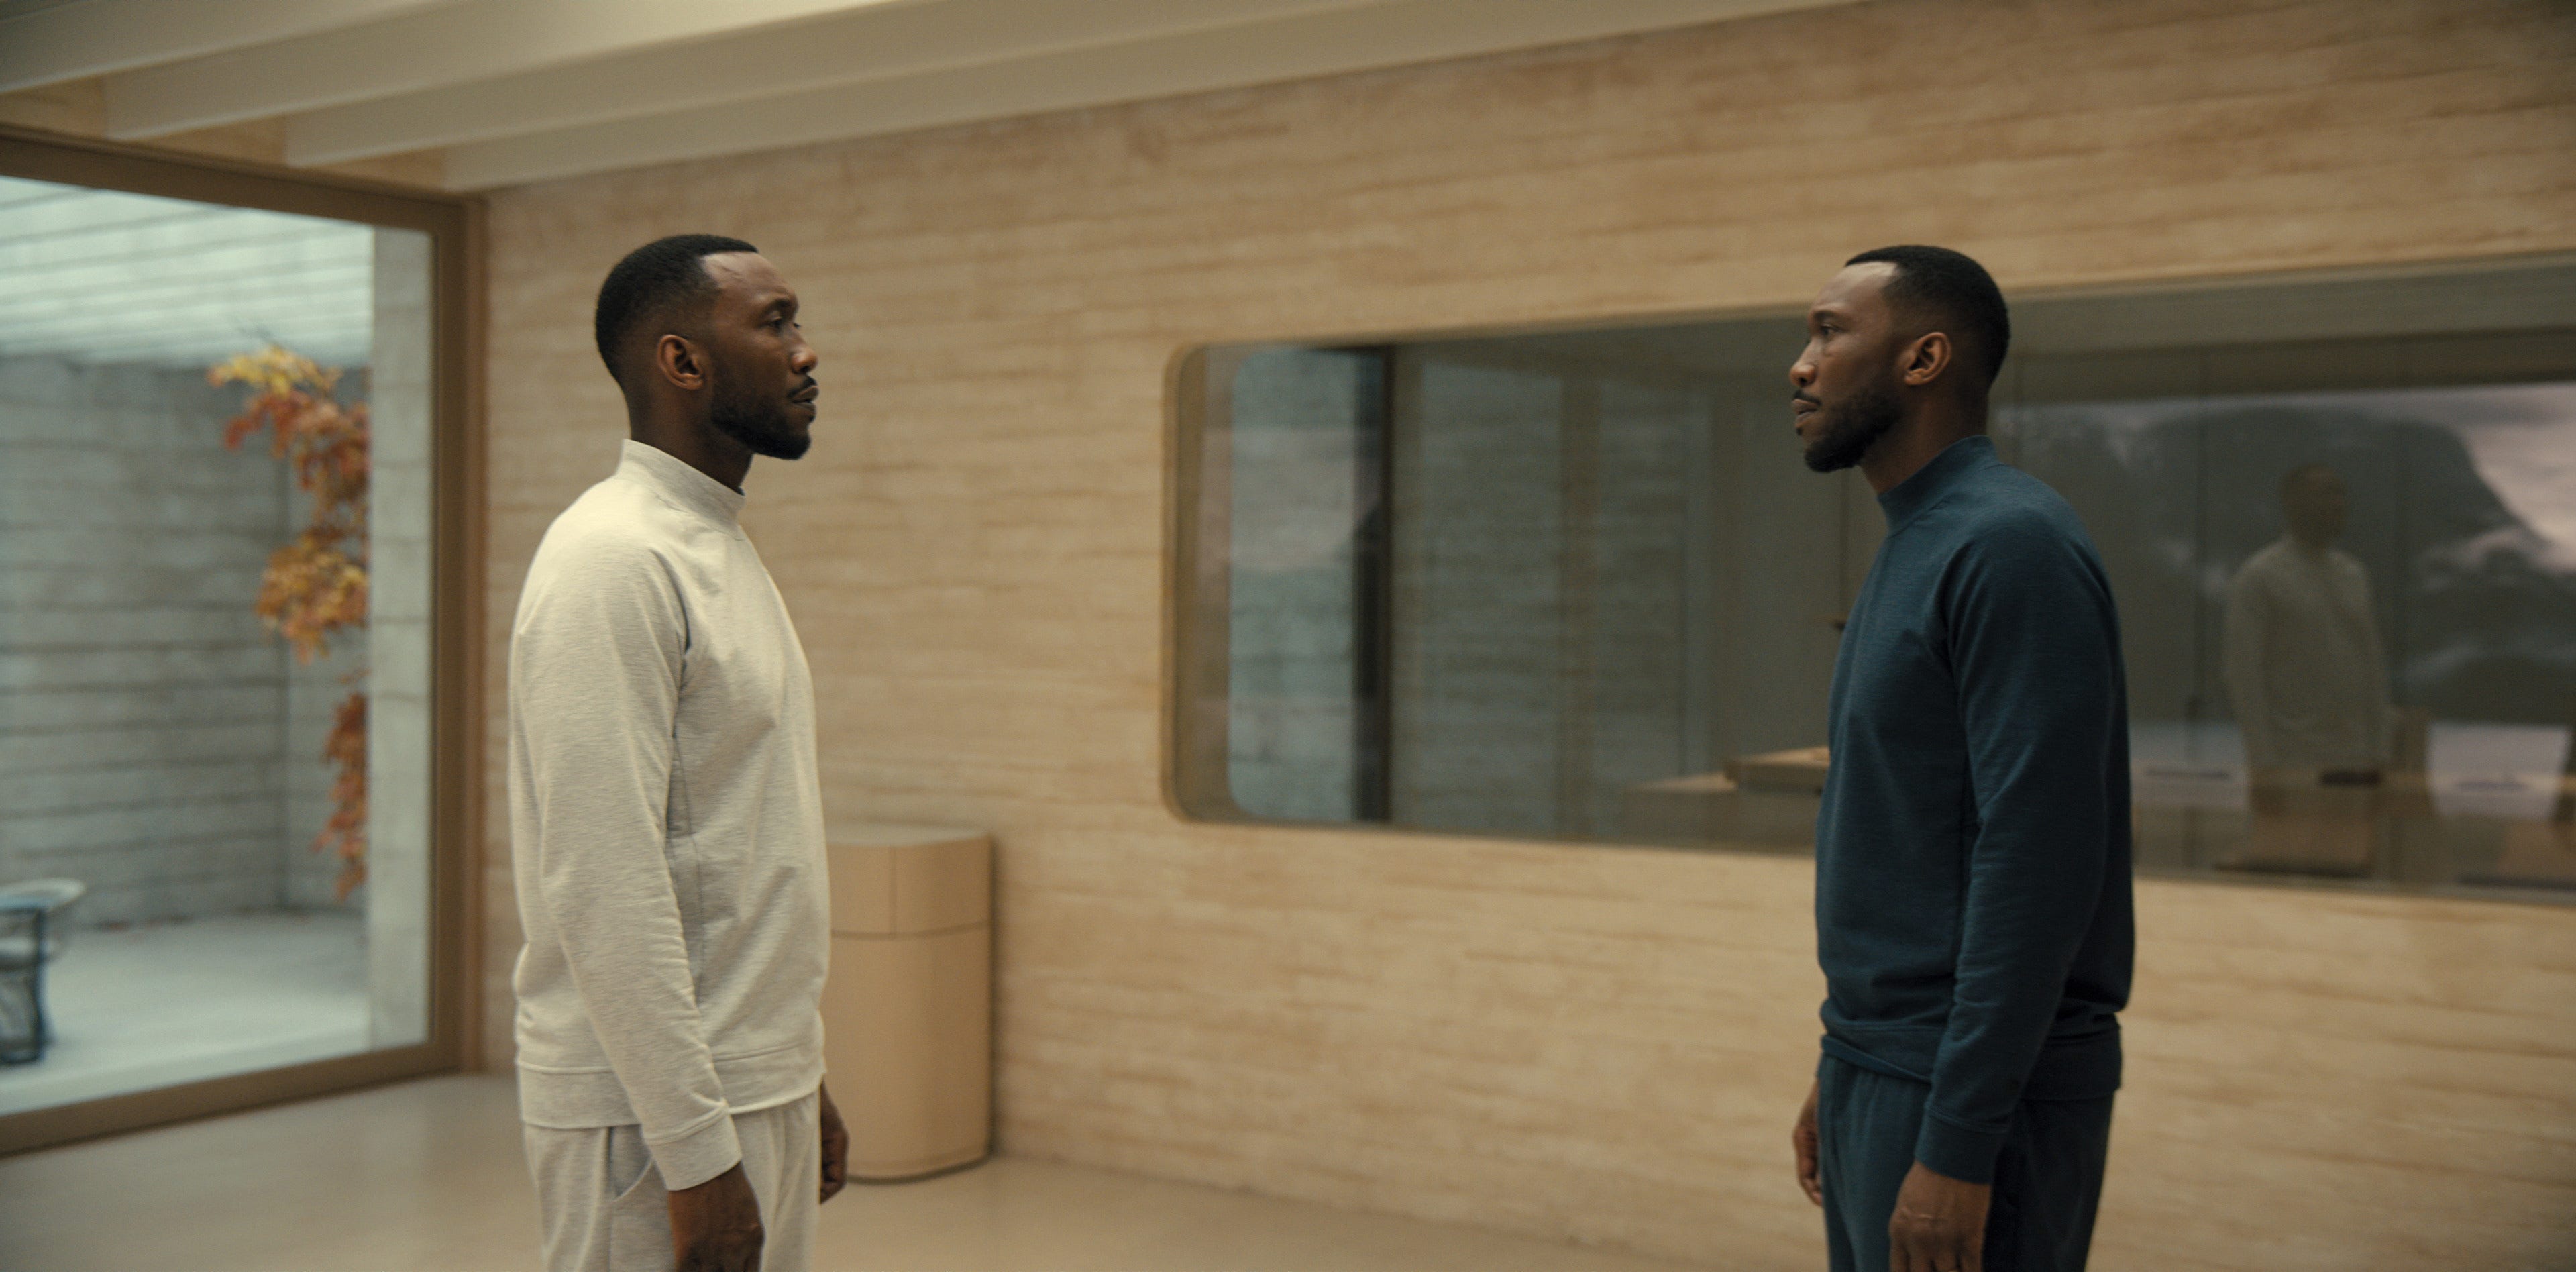 actor Mahershala Ali faces himself as Cameron and Jack in "Swan Song."